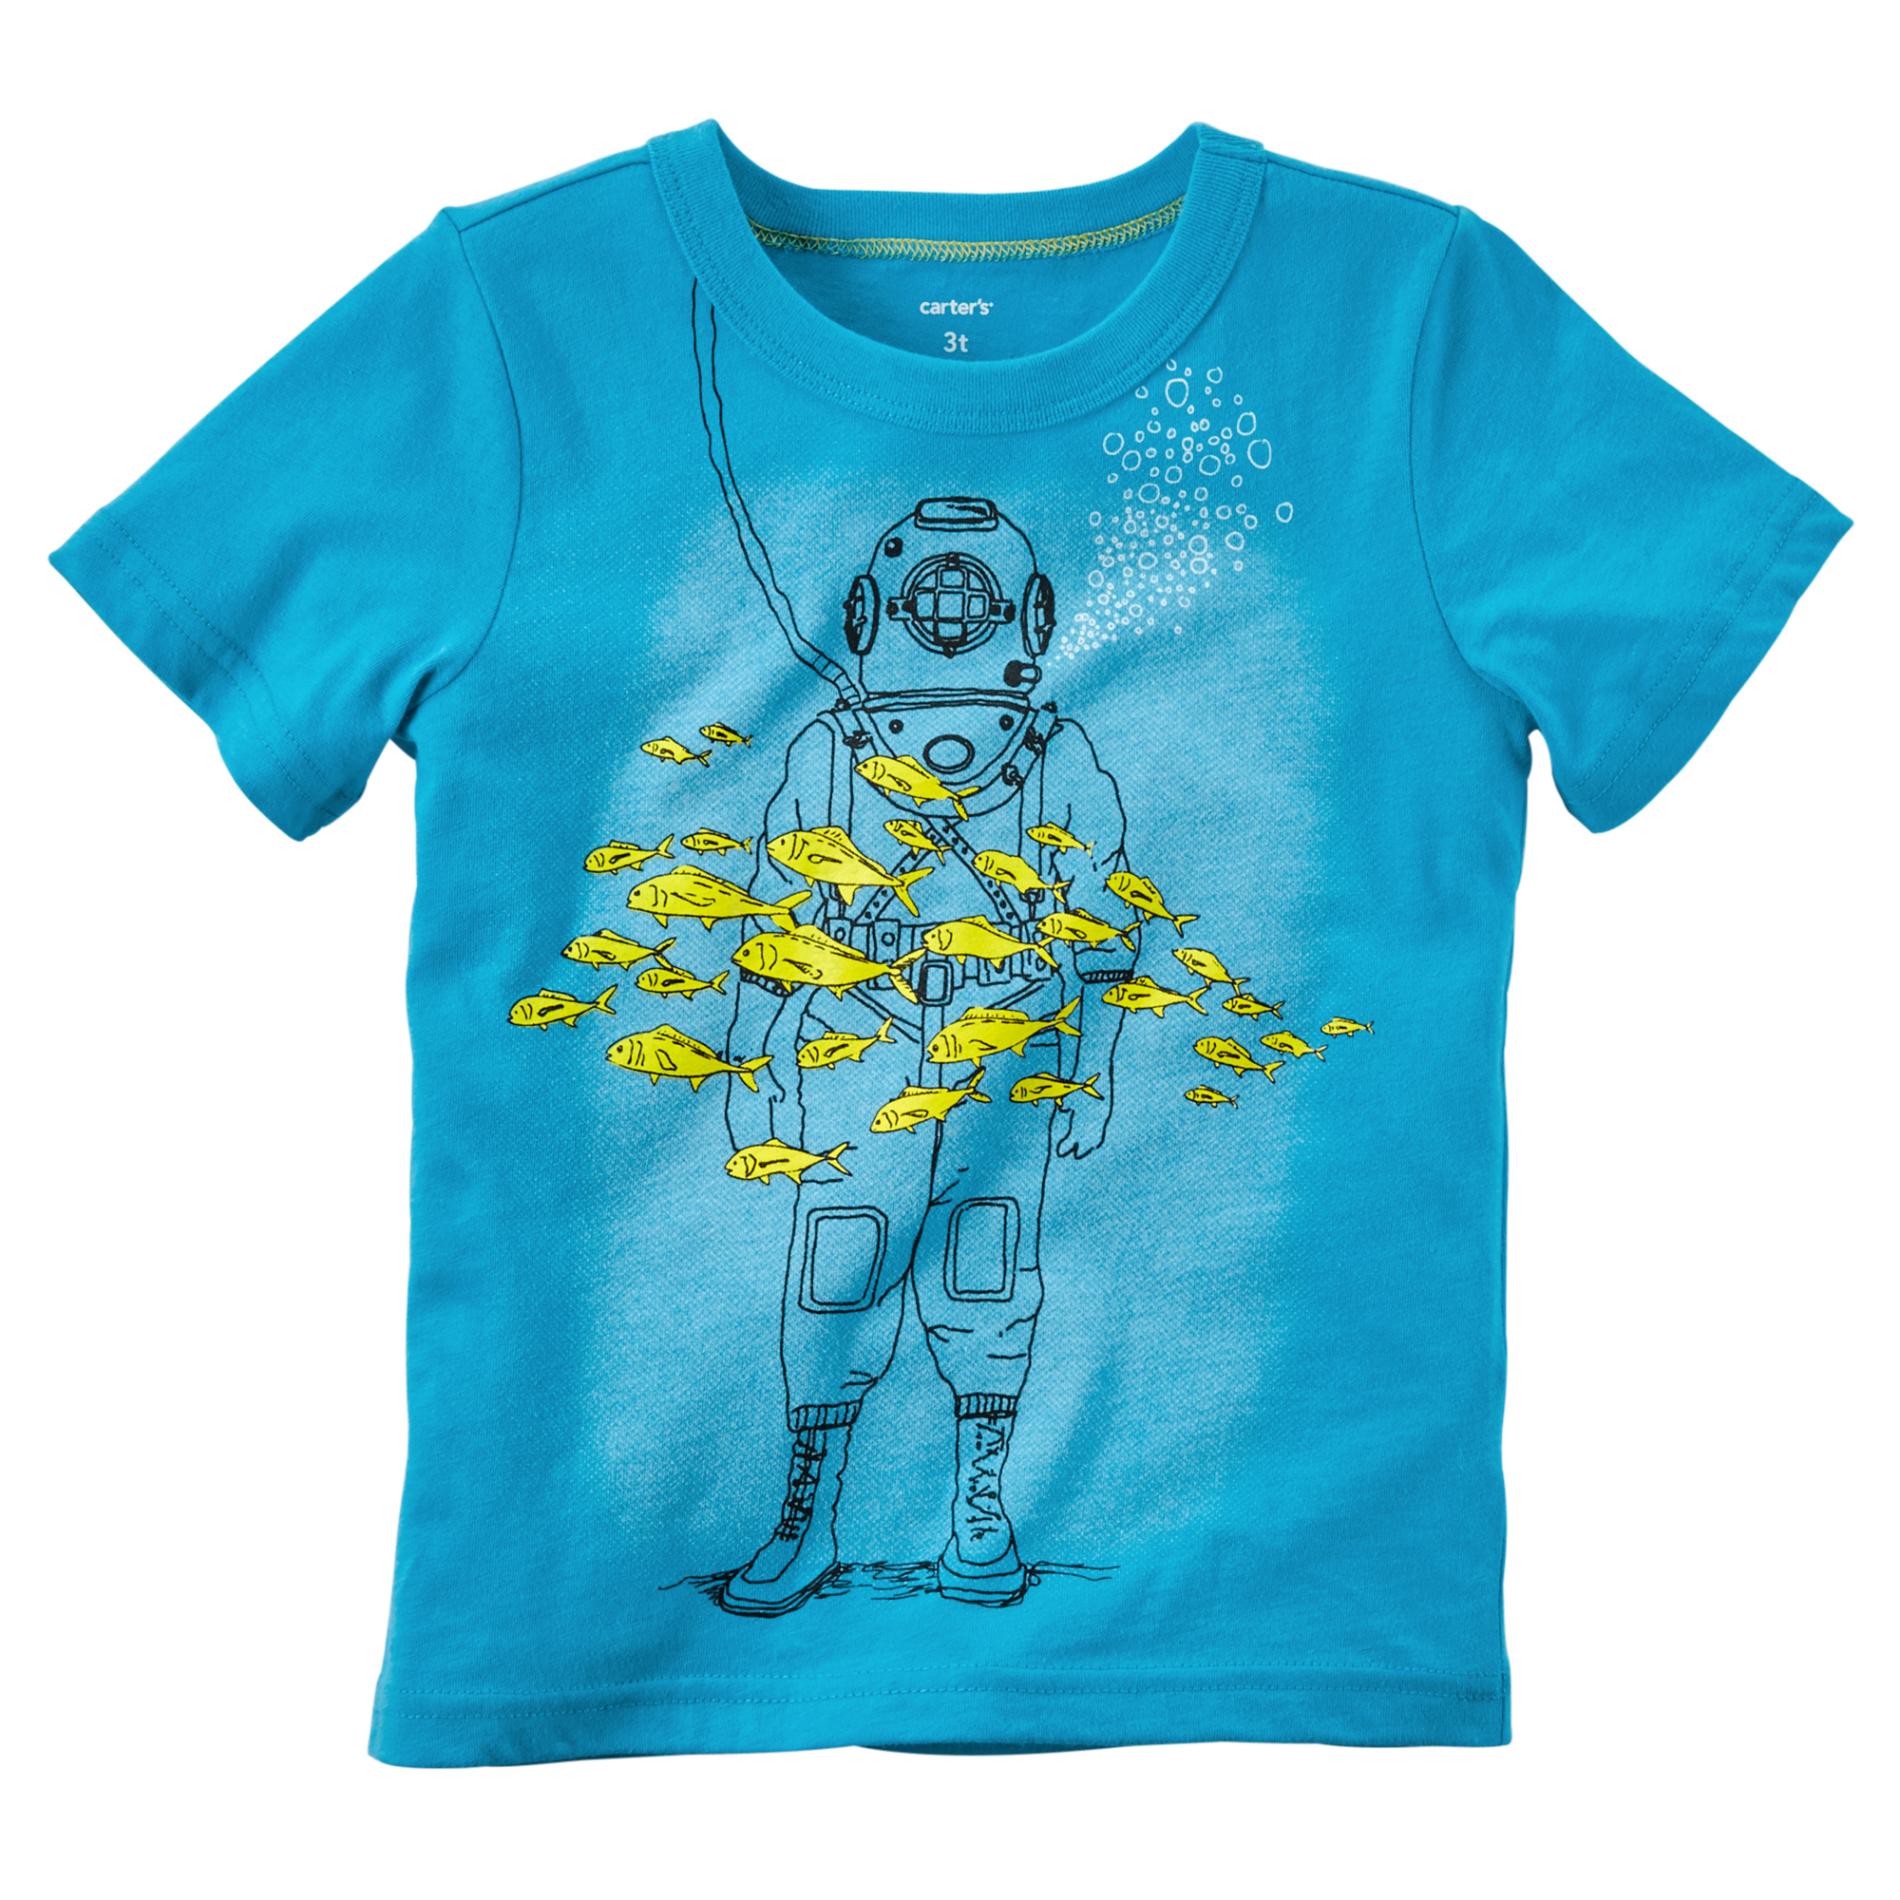 Toddler Boy's Graphic T-Shirt - Diver